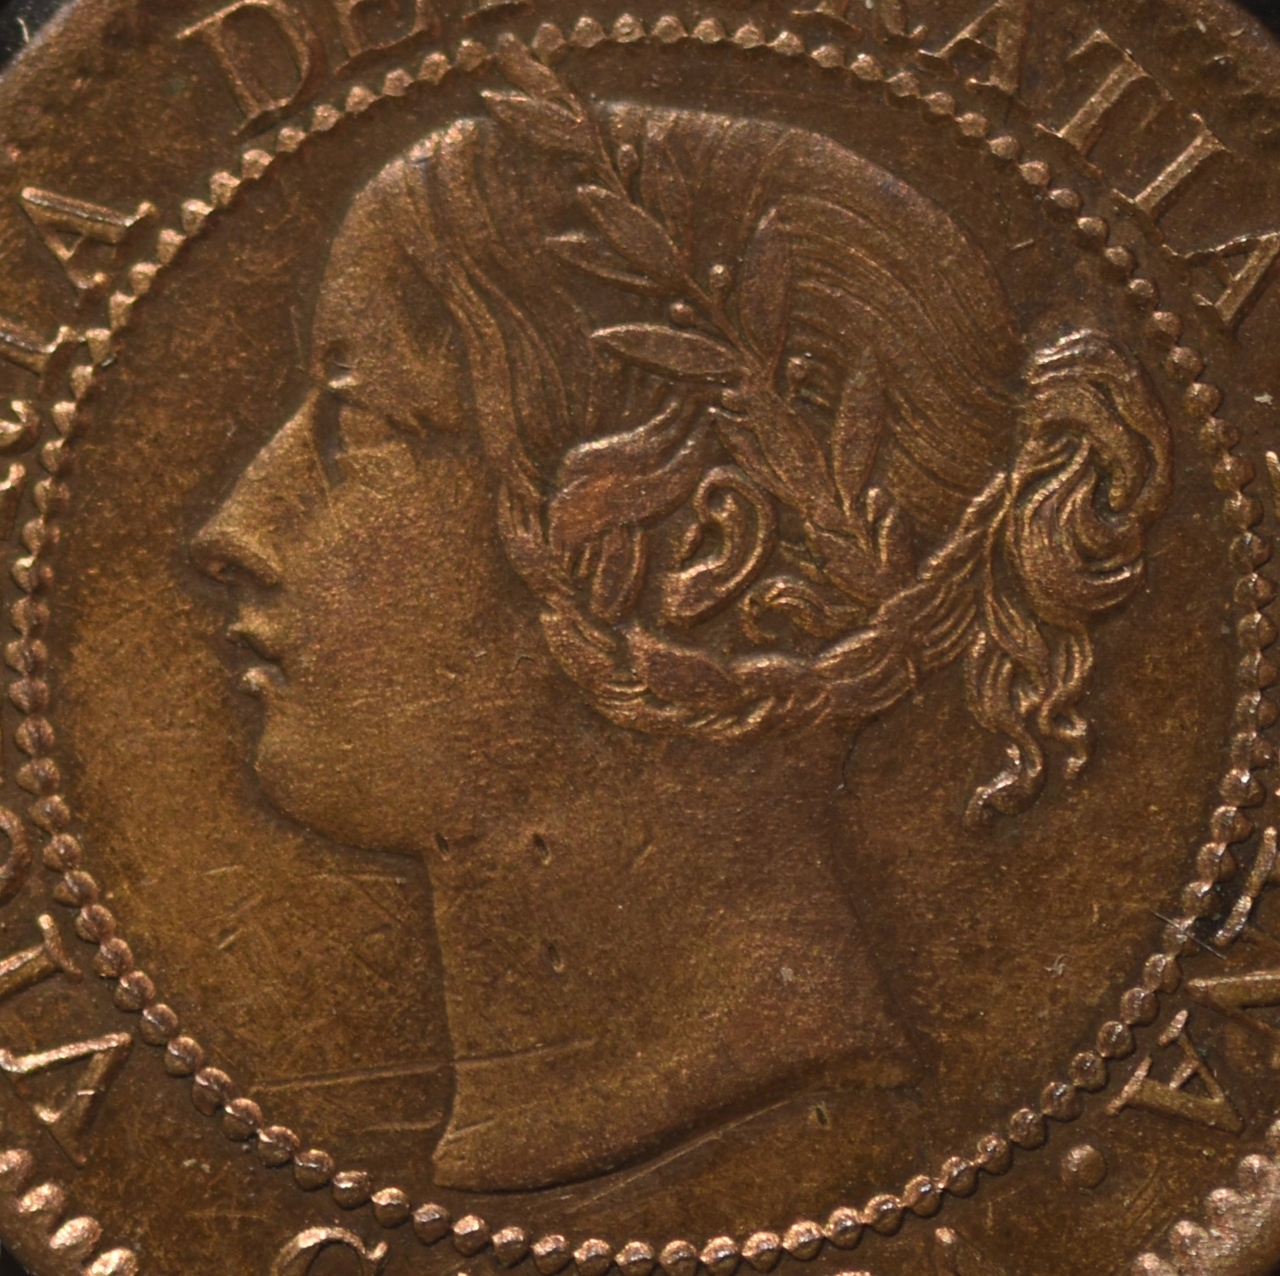 *Canadian Coins with Queen Victoria*